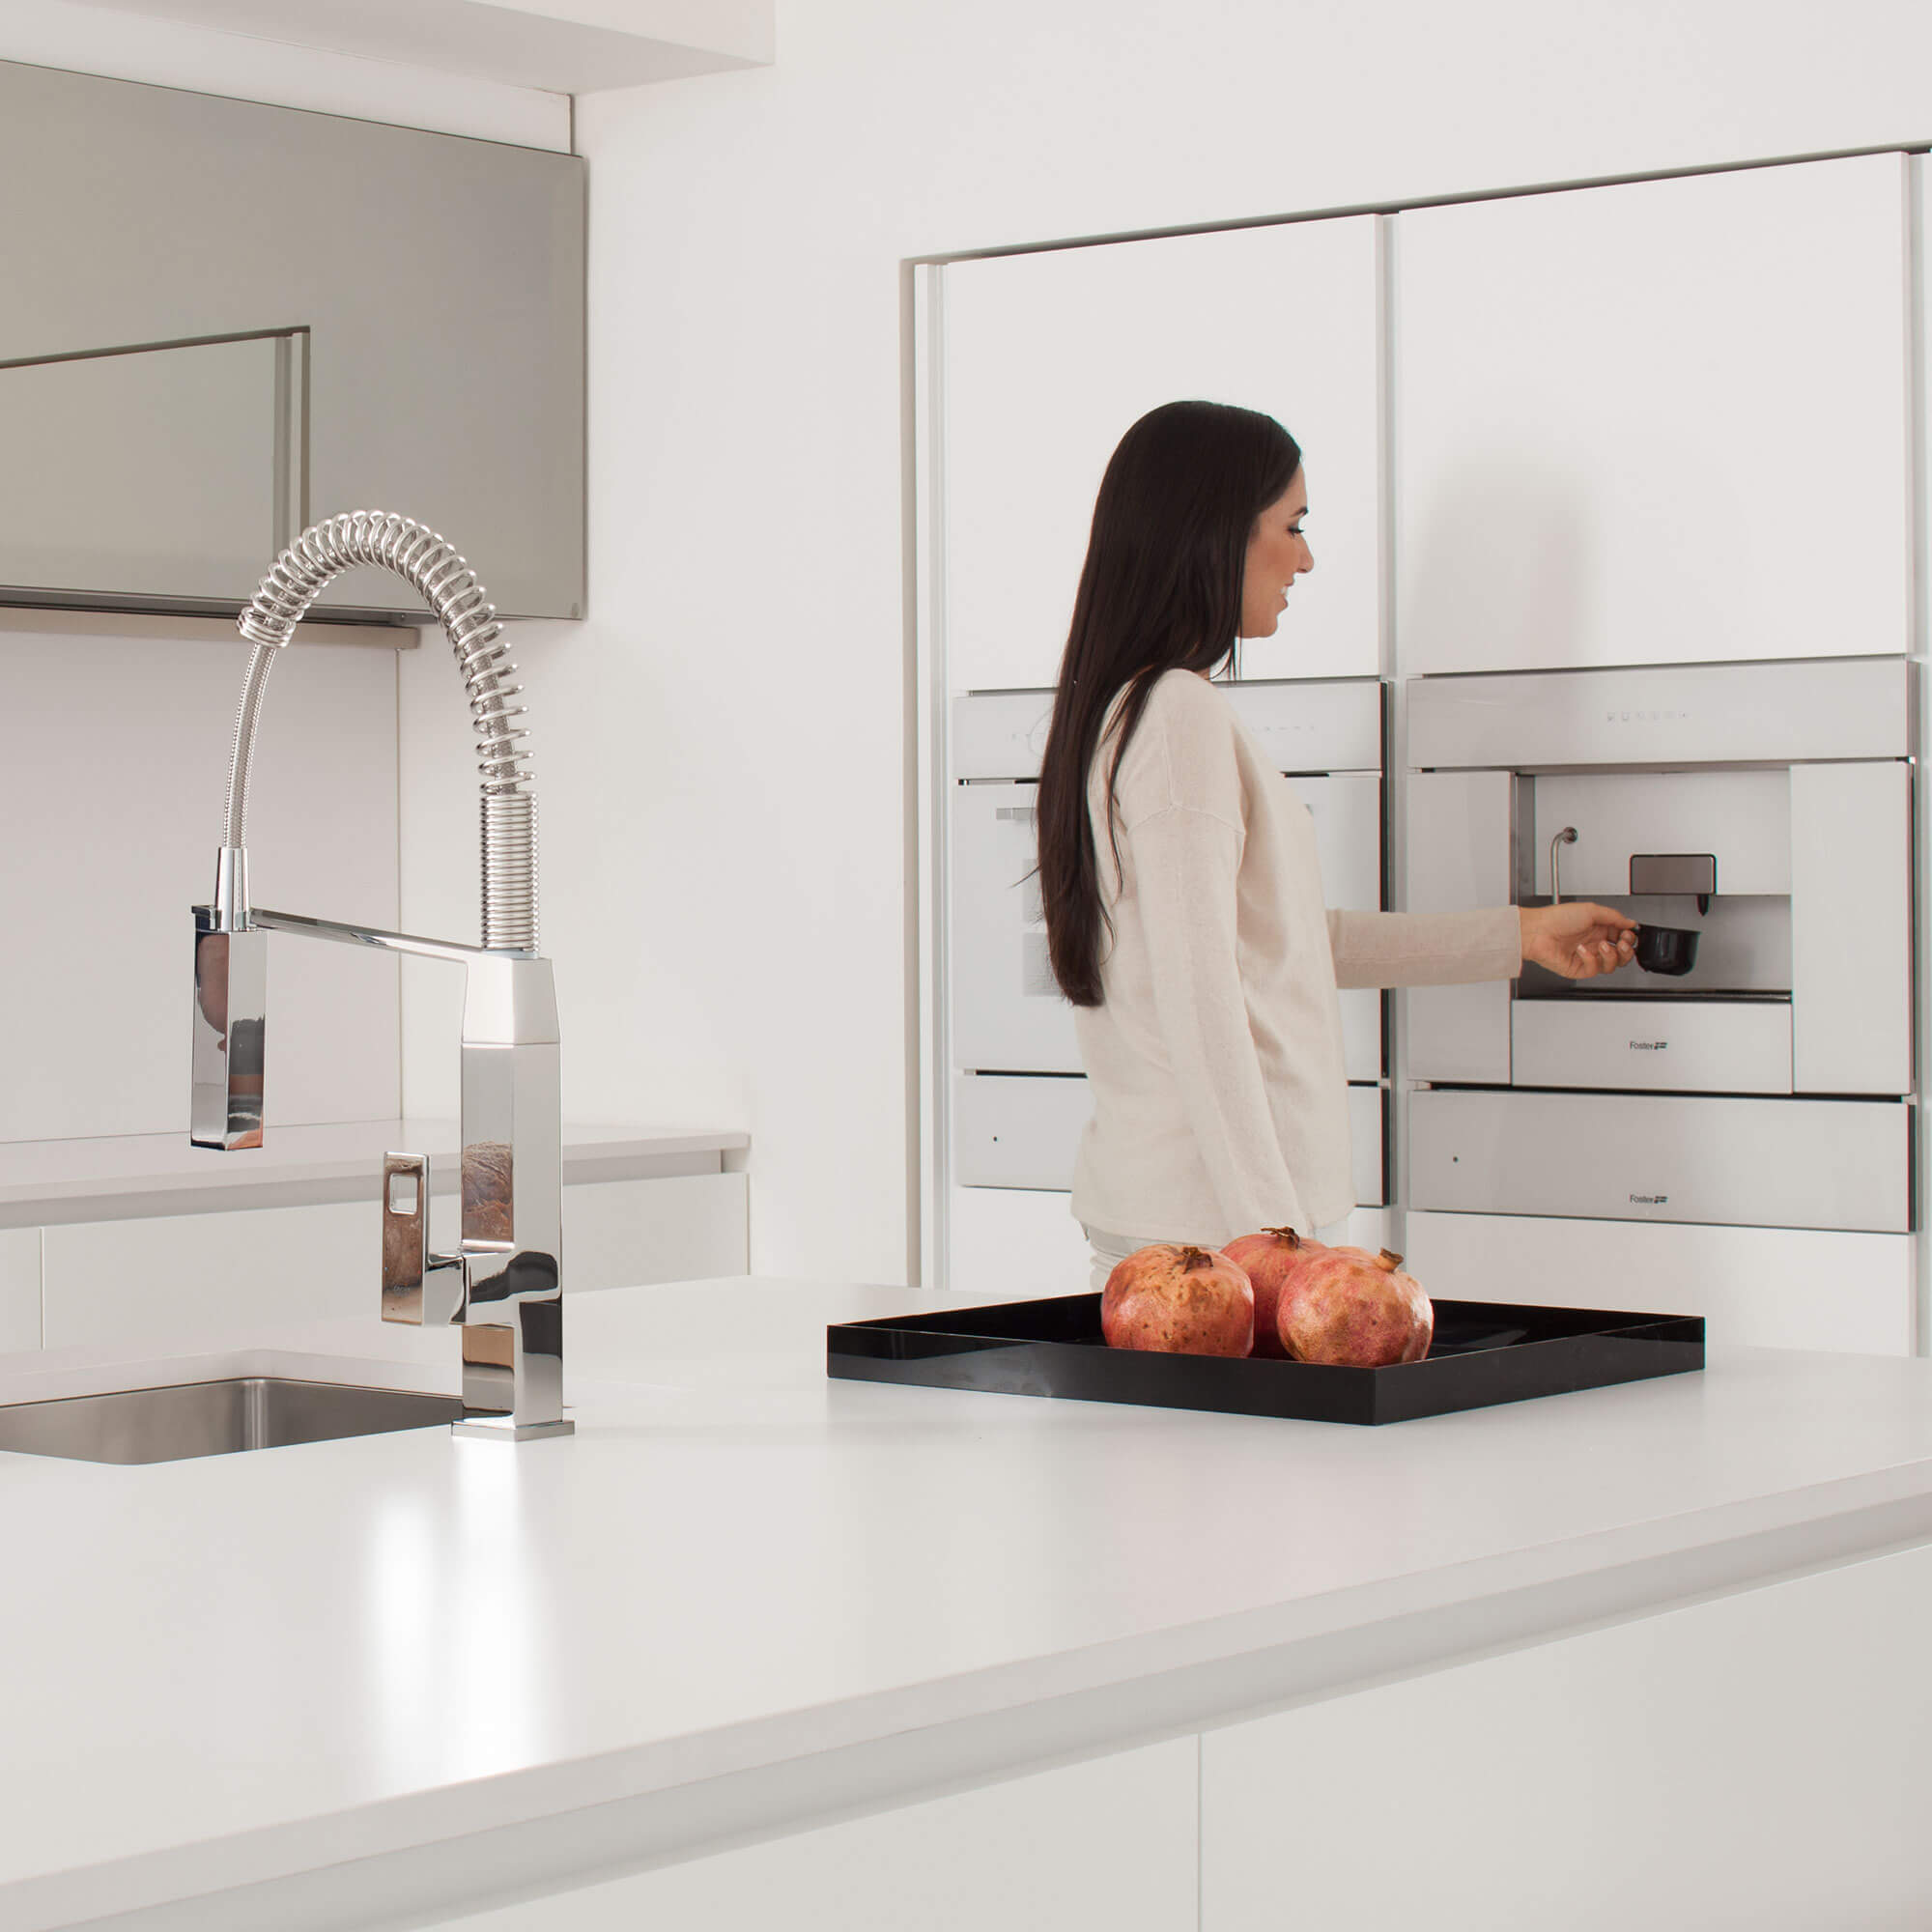 Eurocube kitchen faucet displayed in front of a women. 